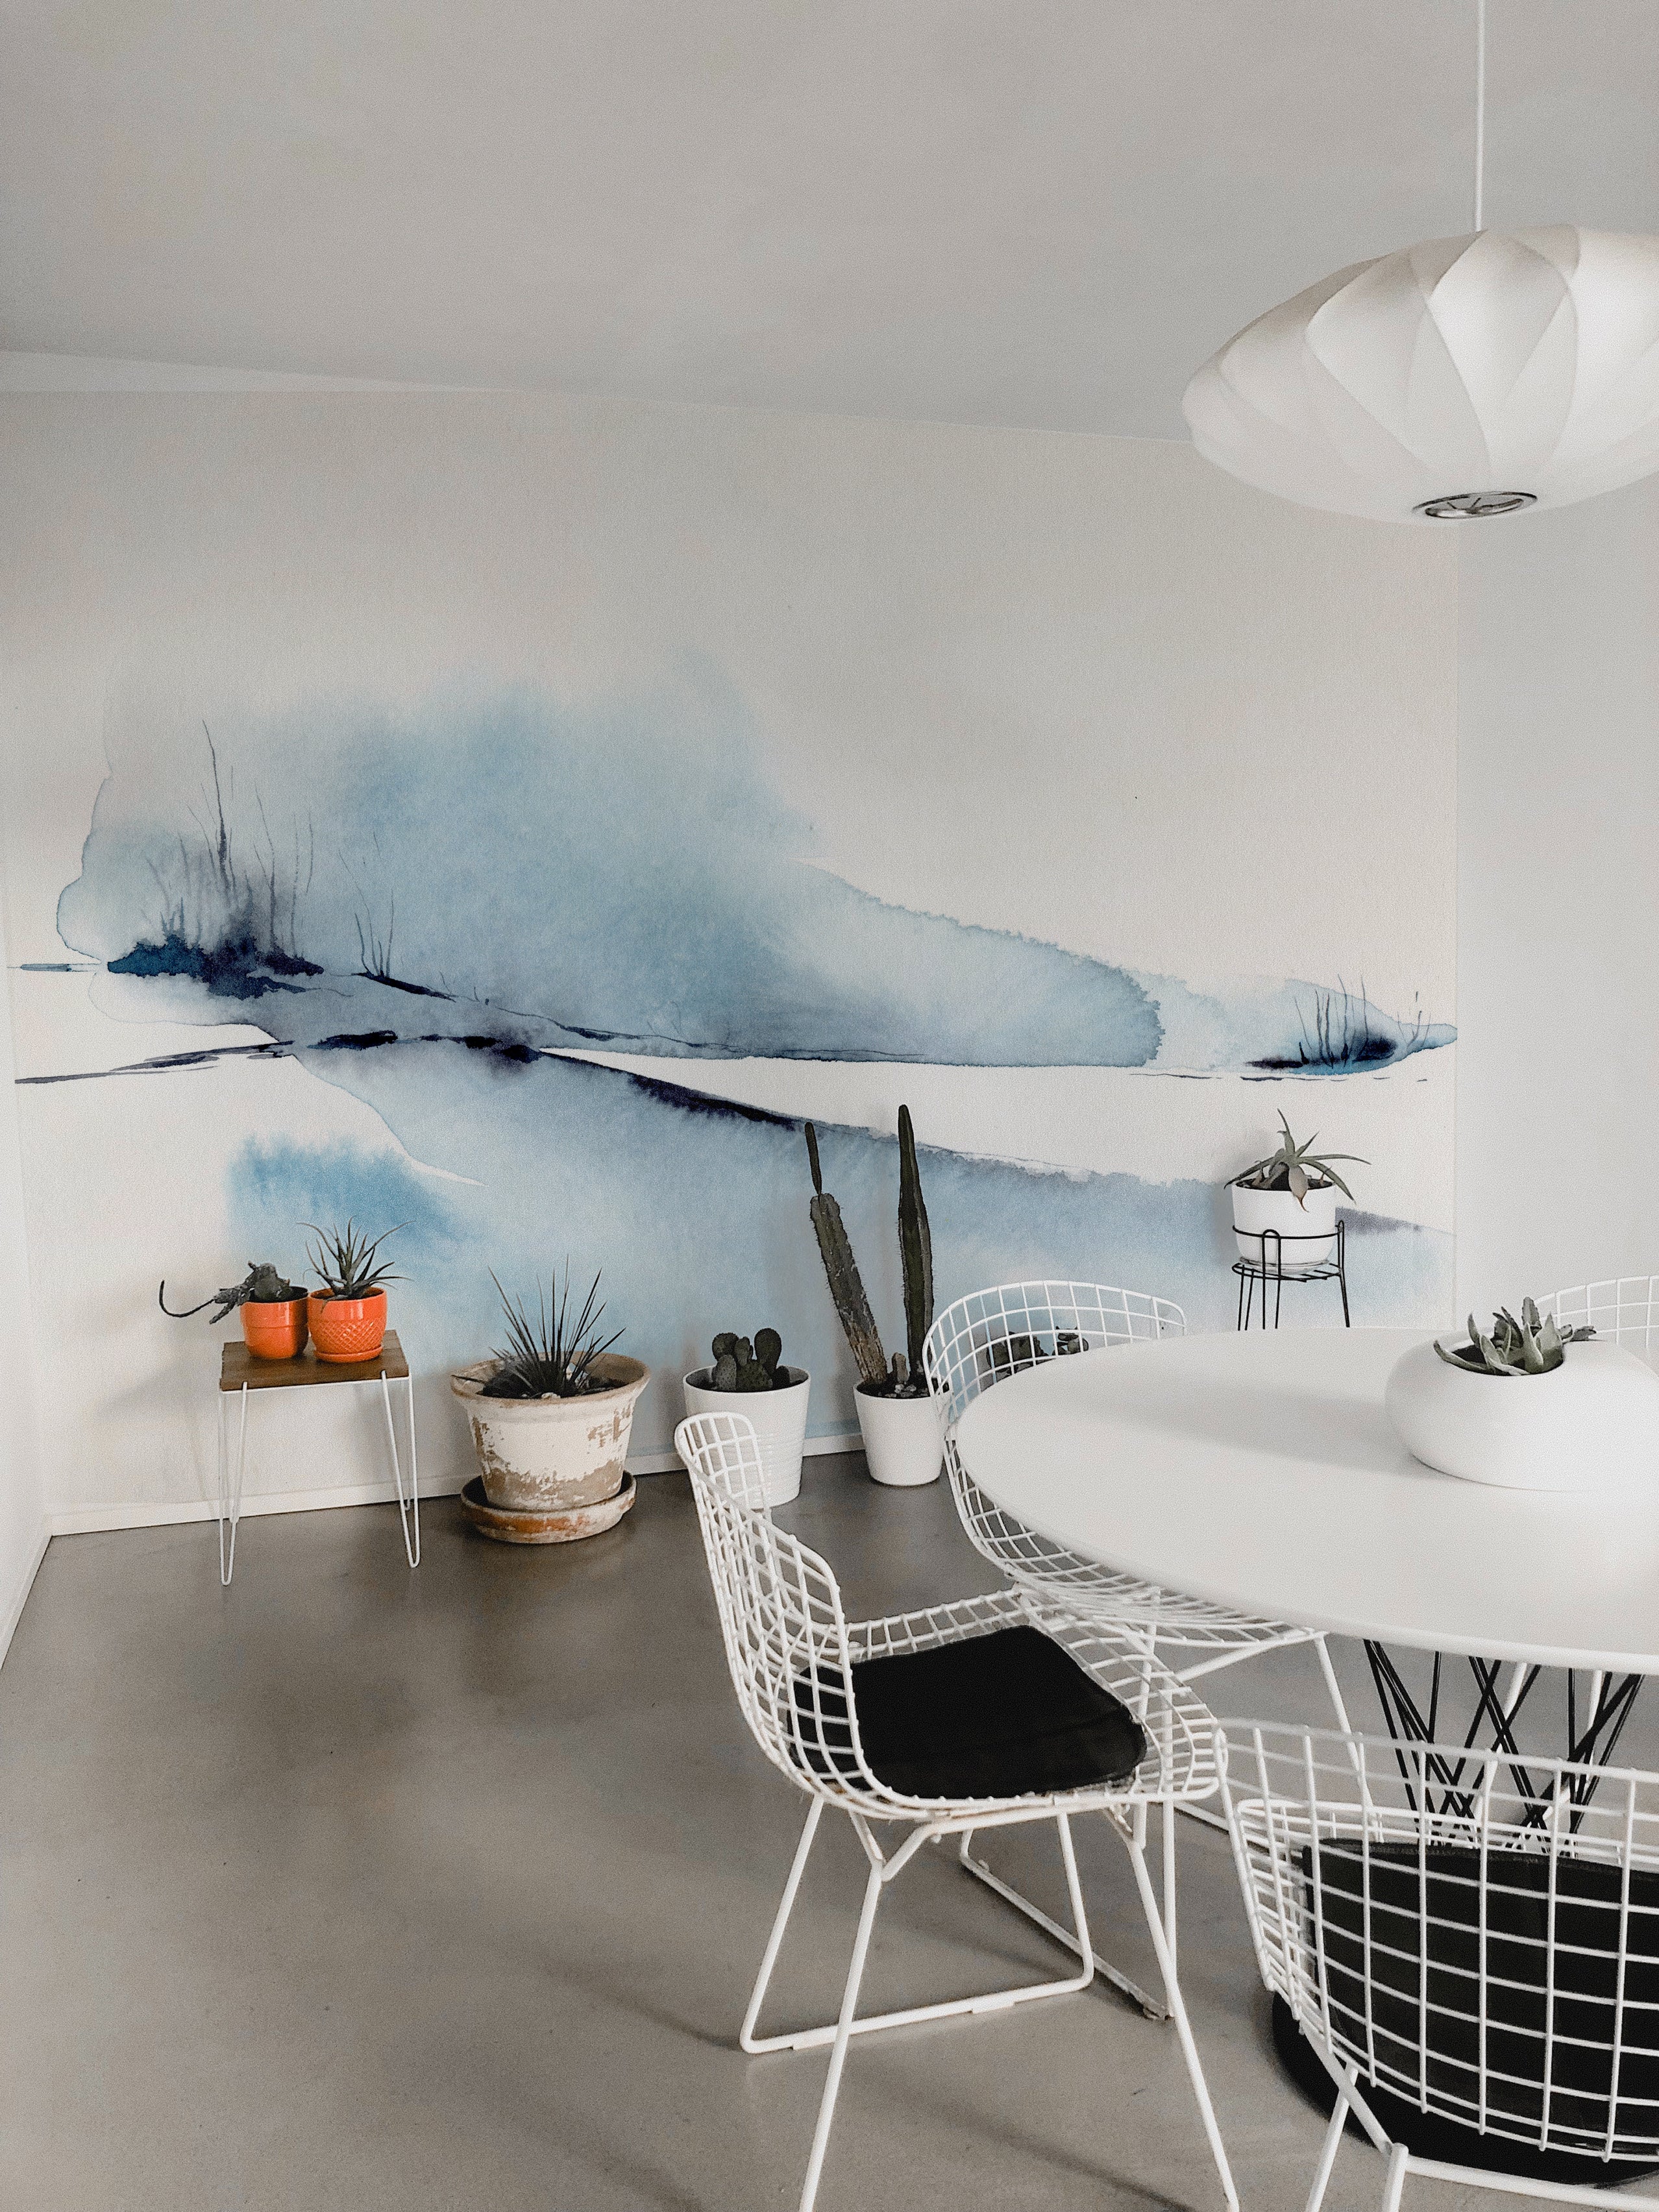 A chic dining area brightened by the "Atmospheric Sky" wall mural. The expansive mural, showcasing vibrant blue hues and abstract watercolor elements, acts as a striking visual centerpiece, contrasting beautifully with the sleek white dining table and wire chairs.